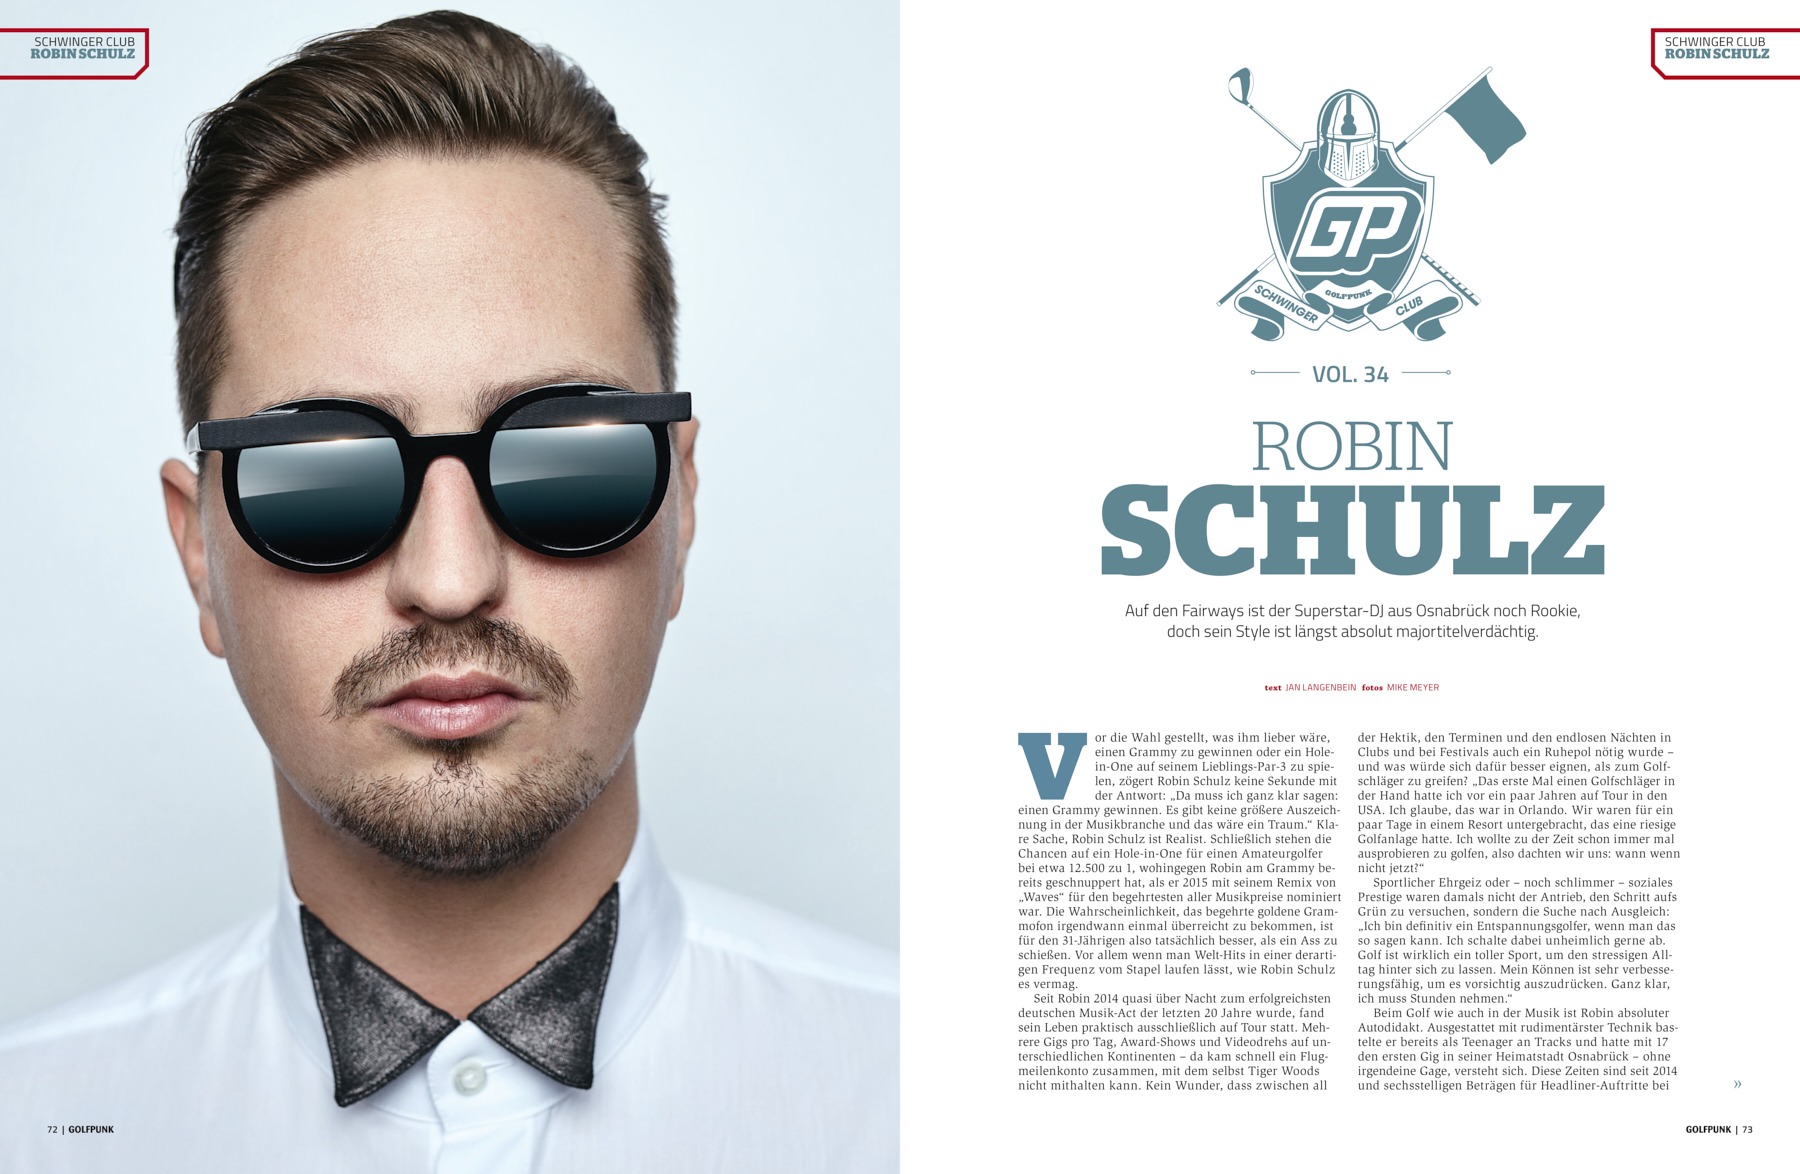 robin schulz golf punk (2 images) by Mike Meyer Photography